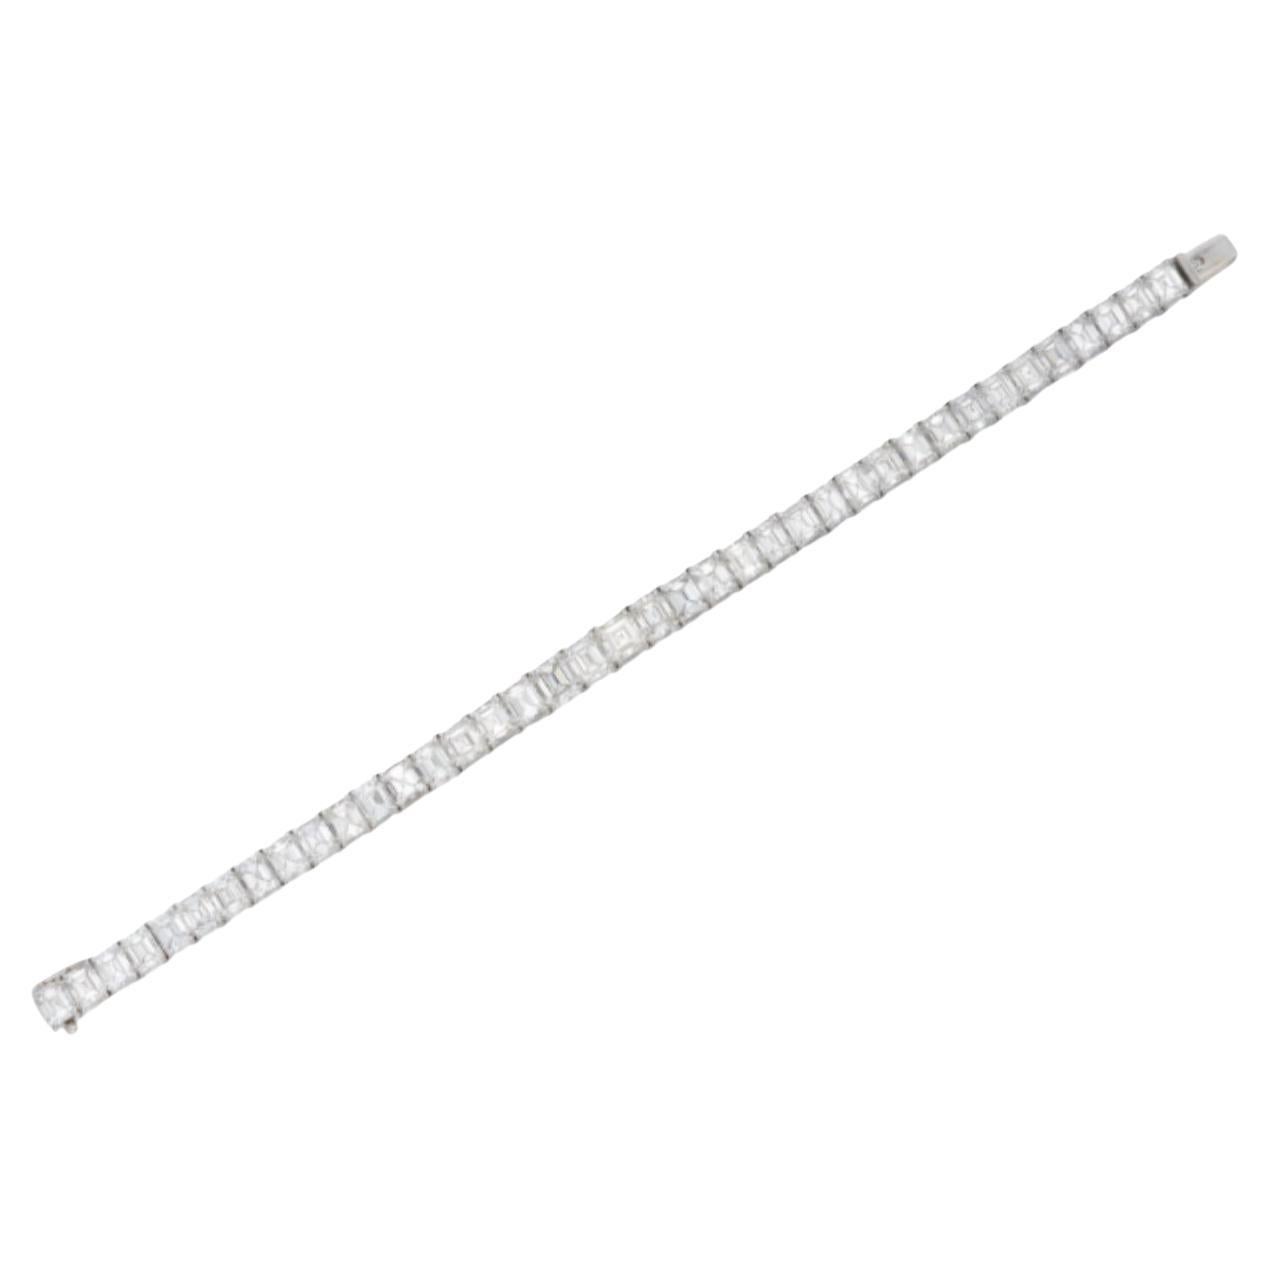 Classic Harry Winston Emerald Cut Diamond Bracelet
This bracelet has 39 emerald cut diamonds weighing a total of 22.12 carats of fine quality diamond (F/G color and  VS clarity) set in platinum shared prong setting. 
Signed and numbered
.Length: 7